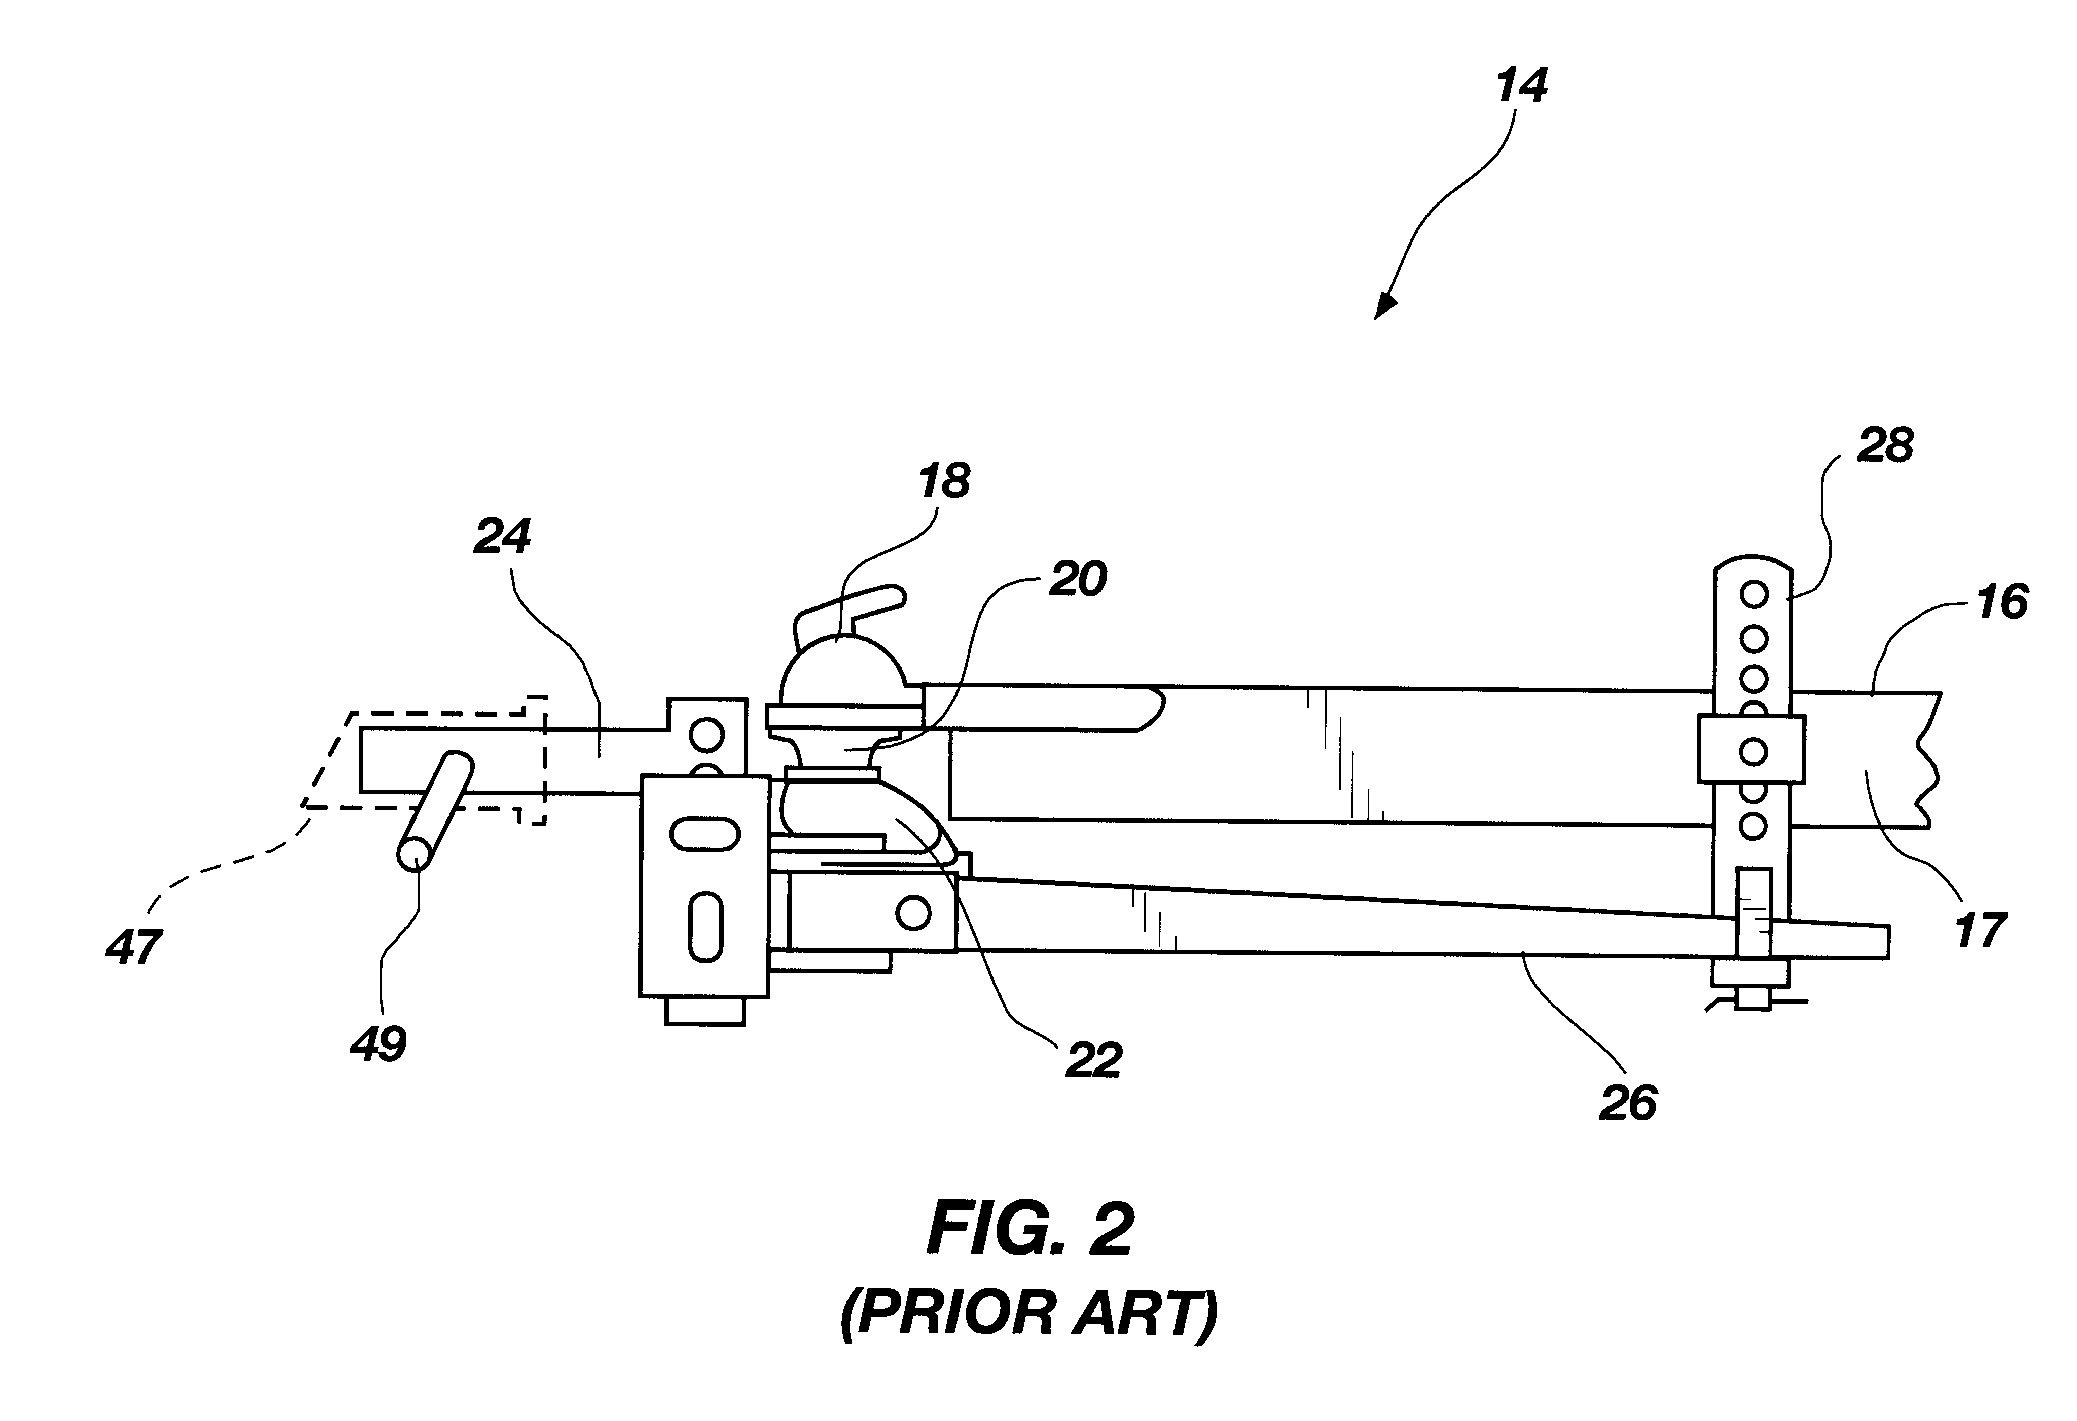 Dual-attachment system for a sway control hitch